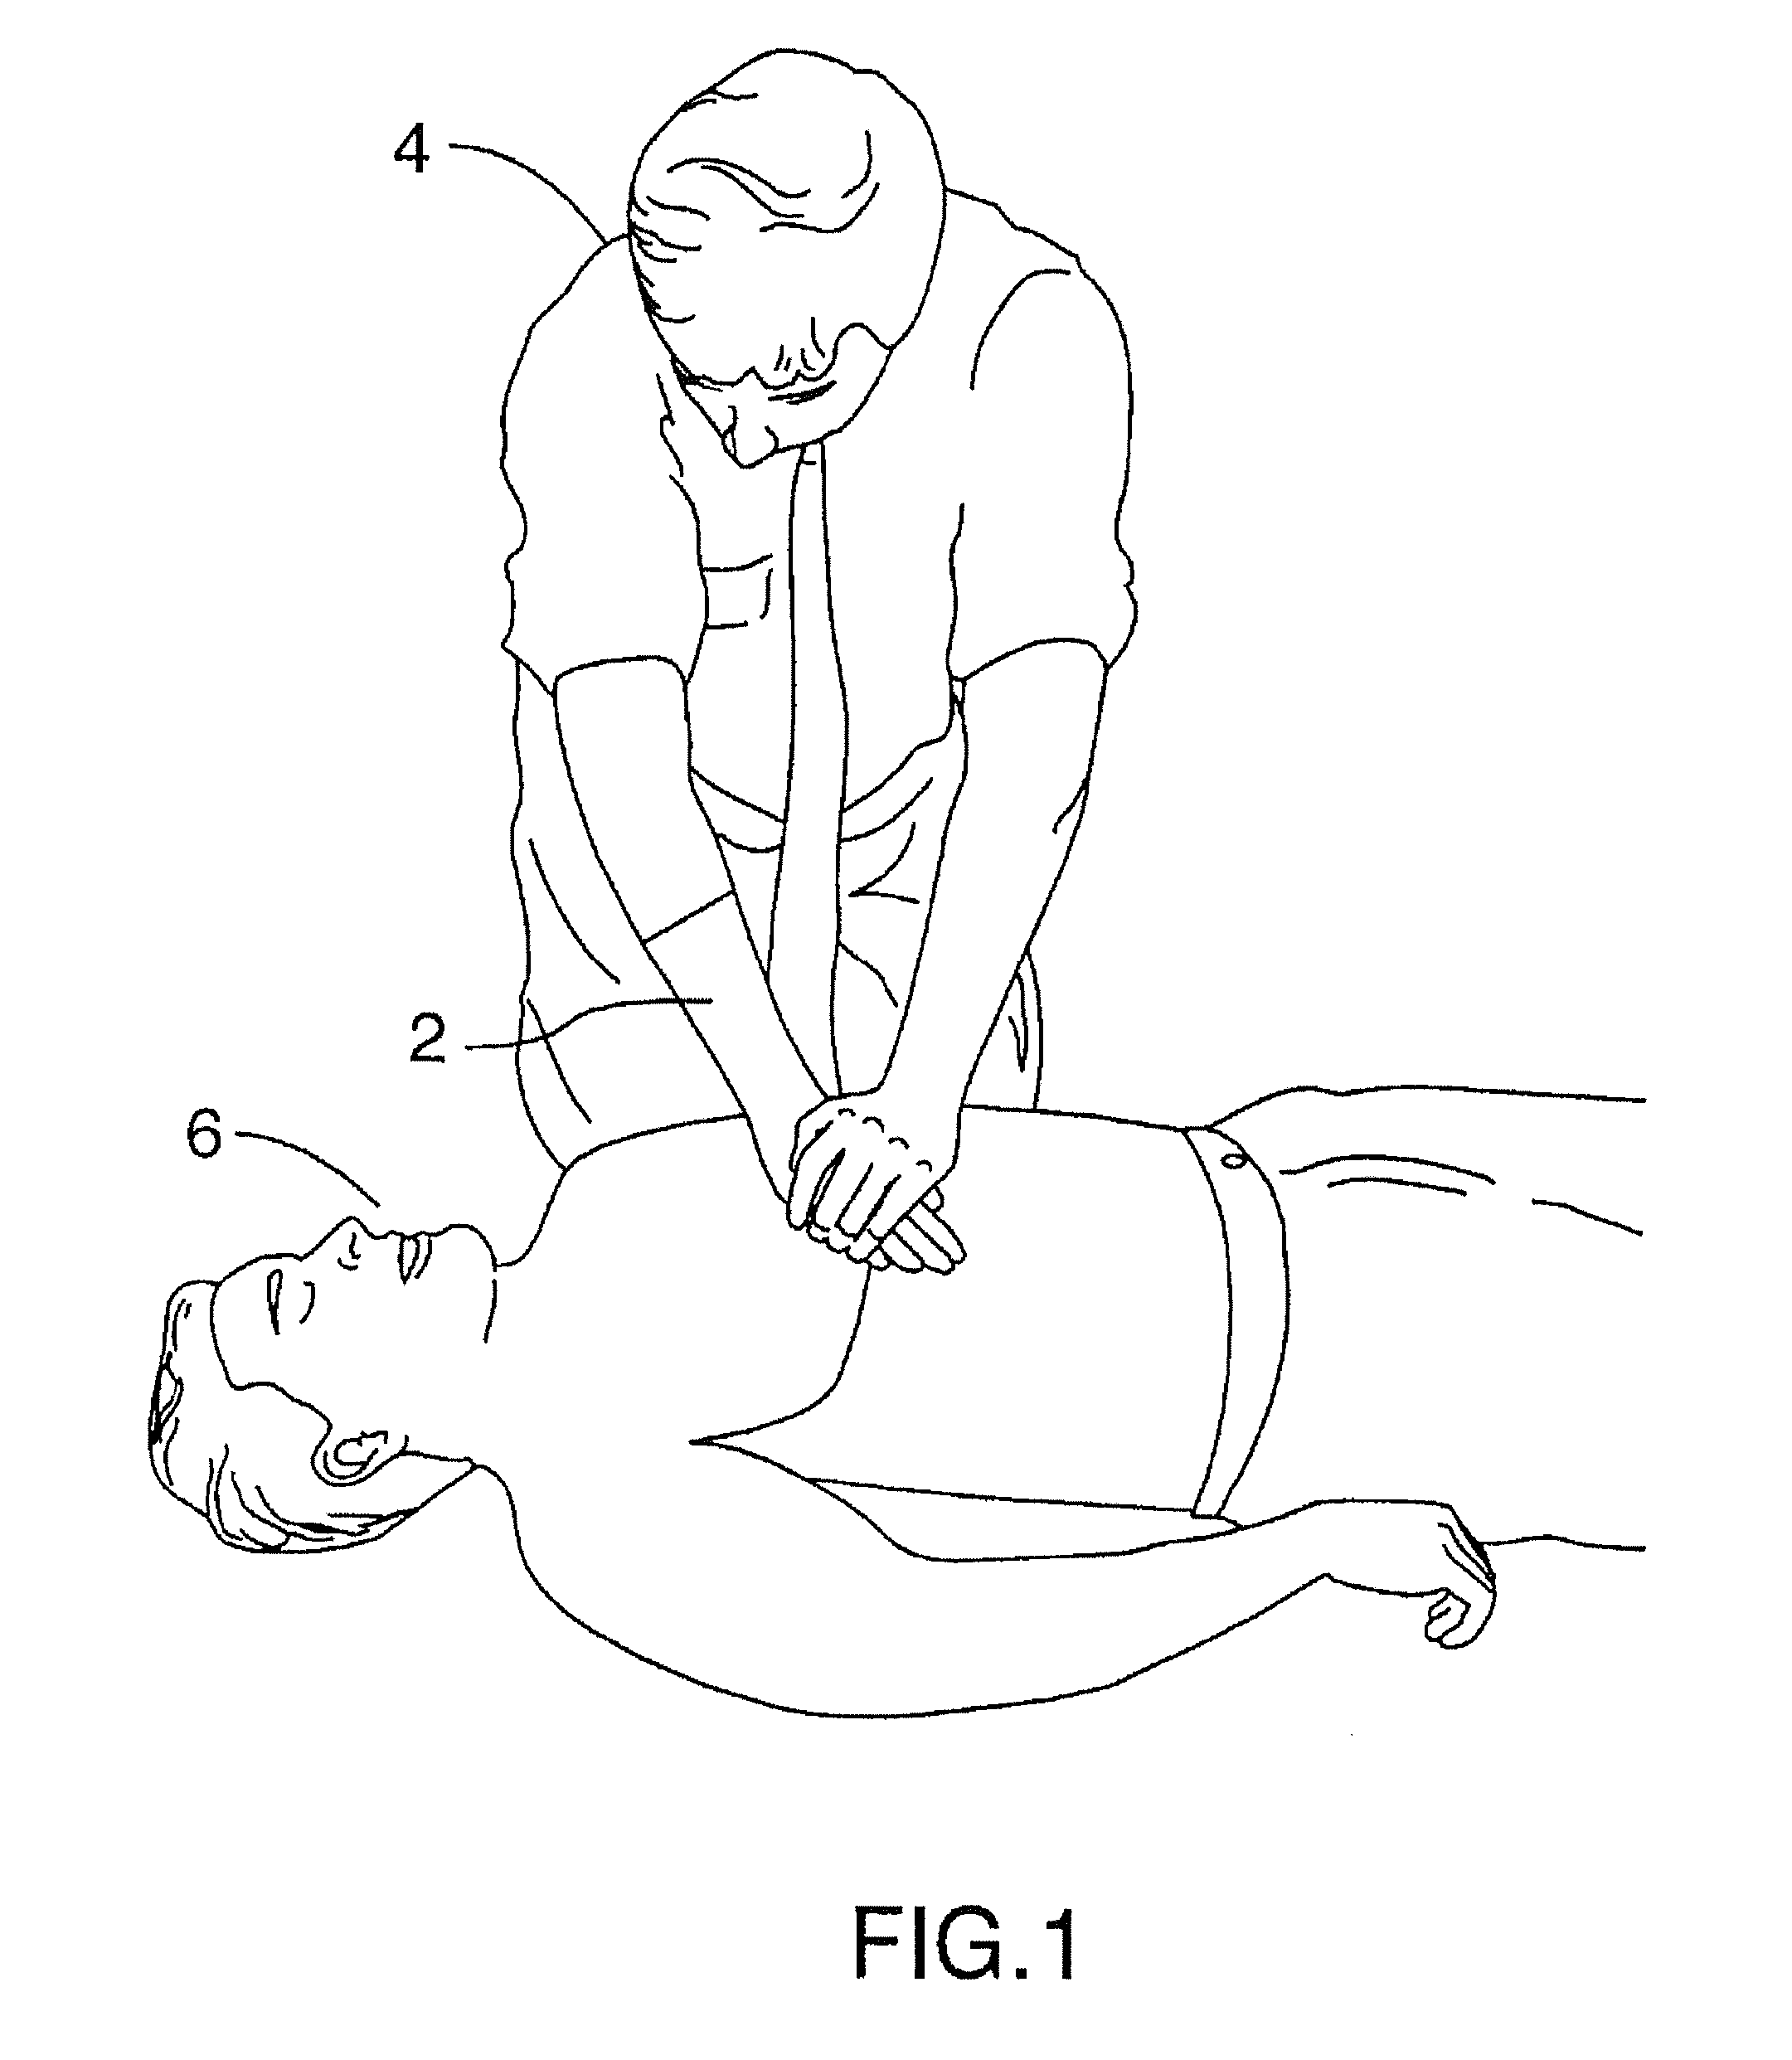 Wearable cpr assist training and testing device